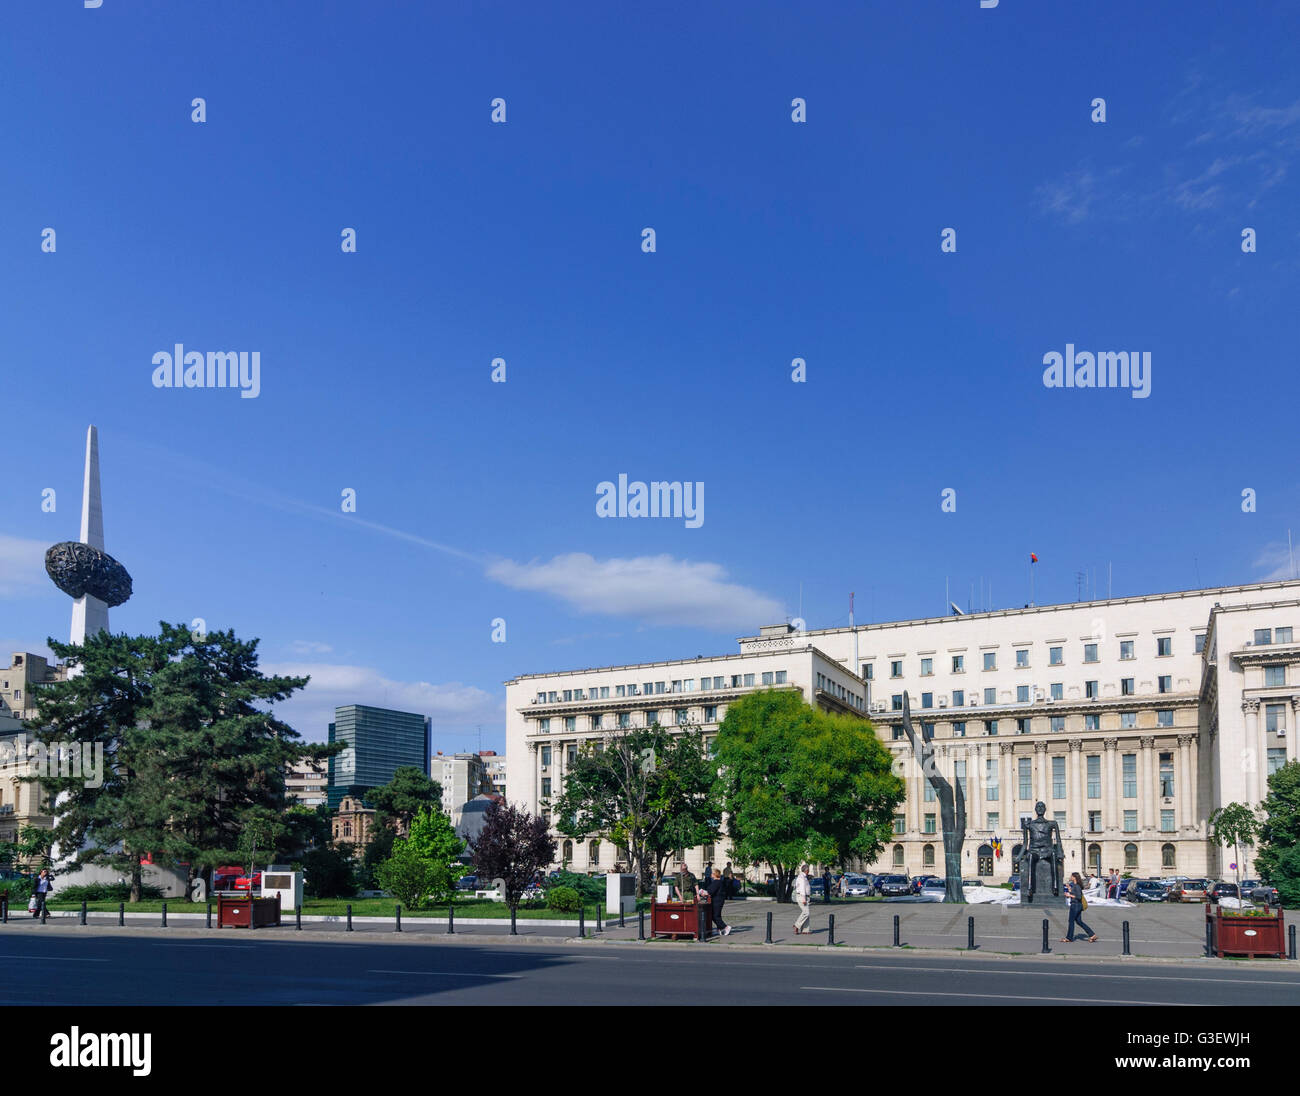 Senate , former Central Committee of the Communist Party, Romania Bucharest Bucuresti Stock Photo